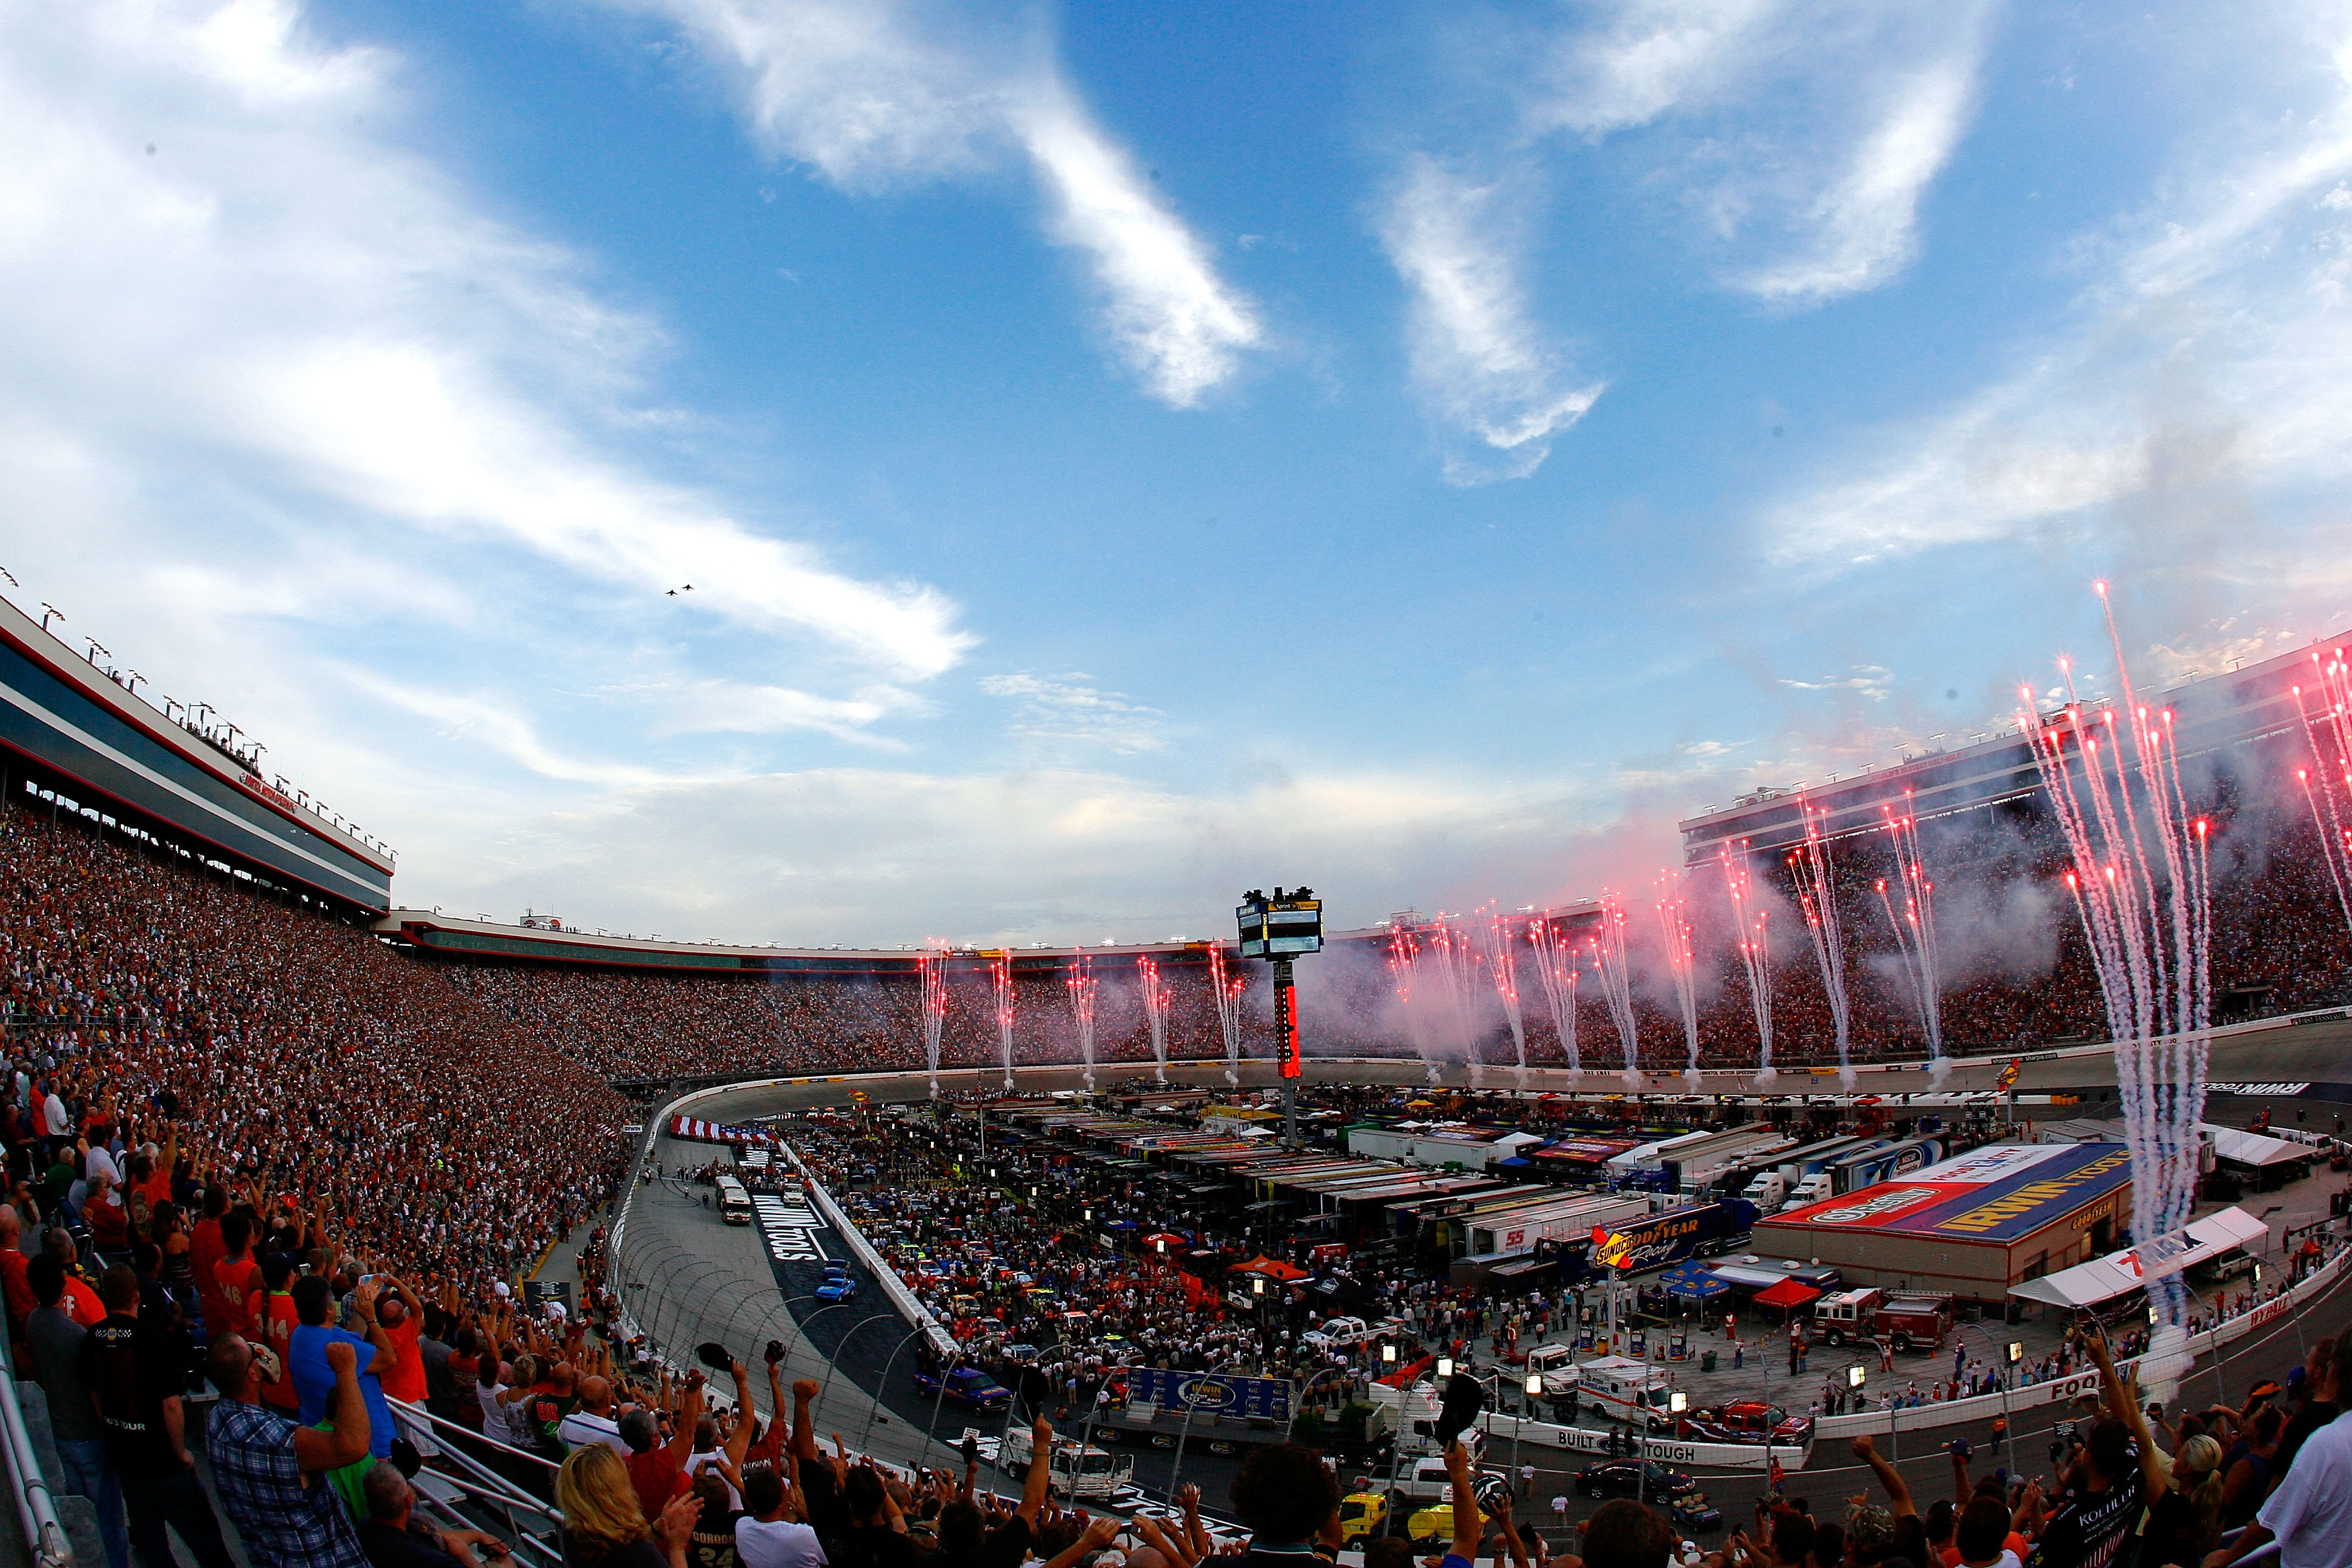 BRISTOL, TN - AUGUST 21:  Fireworks explode during pre-race ceremonies prior to the NASCAR Sprint Cup Series IRWIN Tools Night Race at Bristol Motor Speedway on August 21, 2010 in Bristol, Tennessee.  (Photo by Geoff Burke/Getty Images for NASCAR)